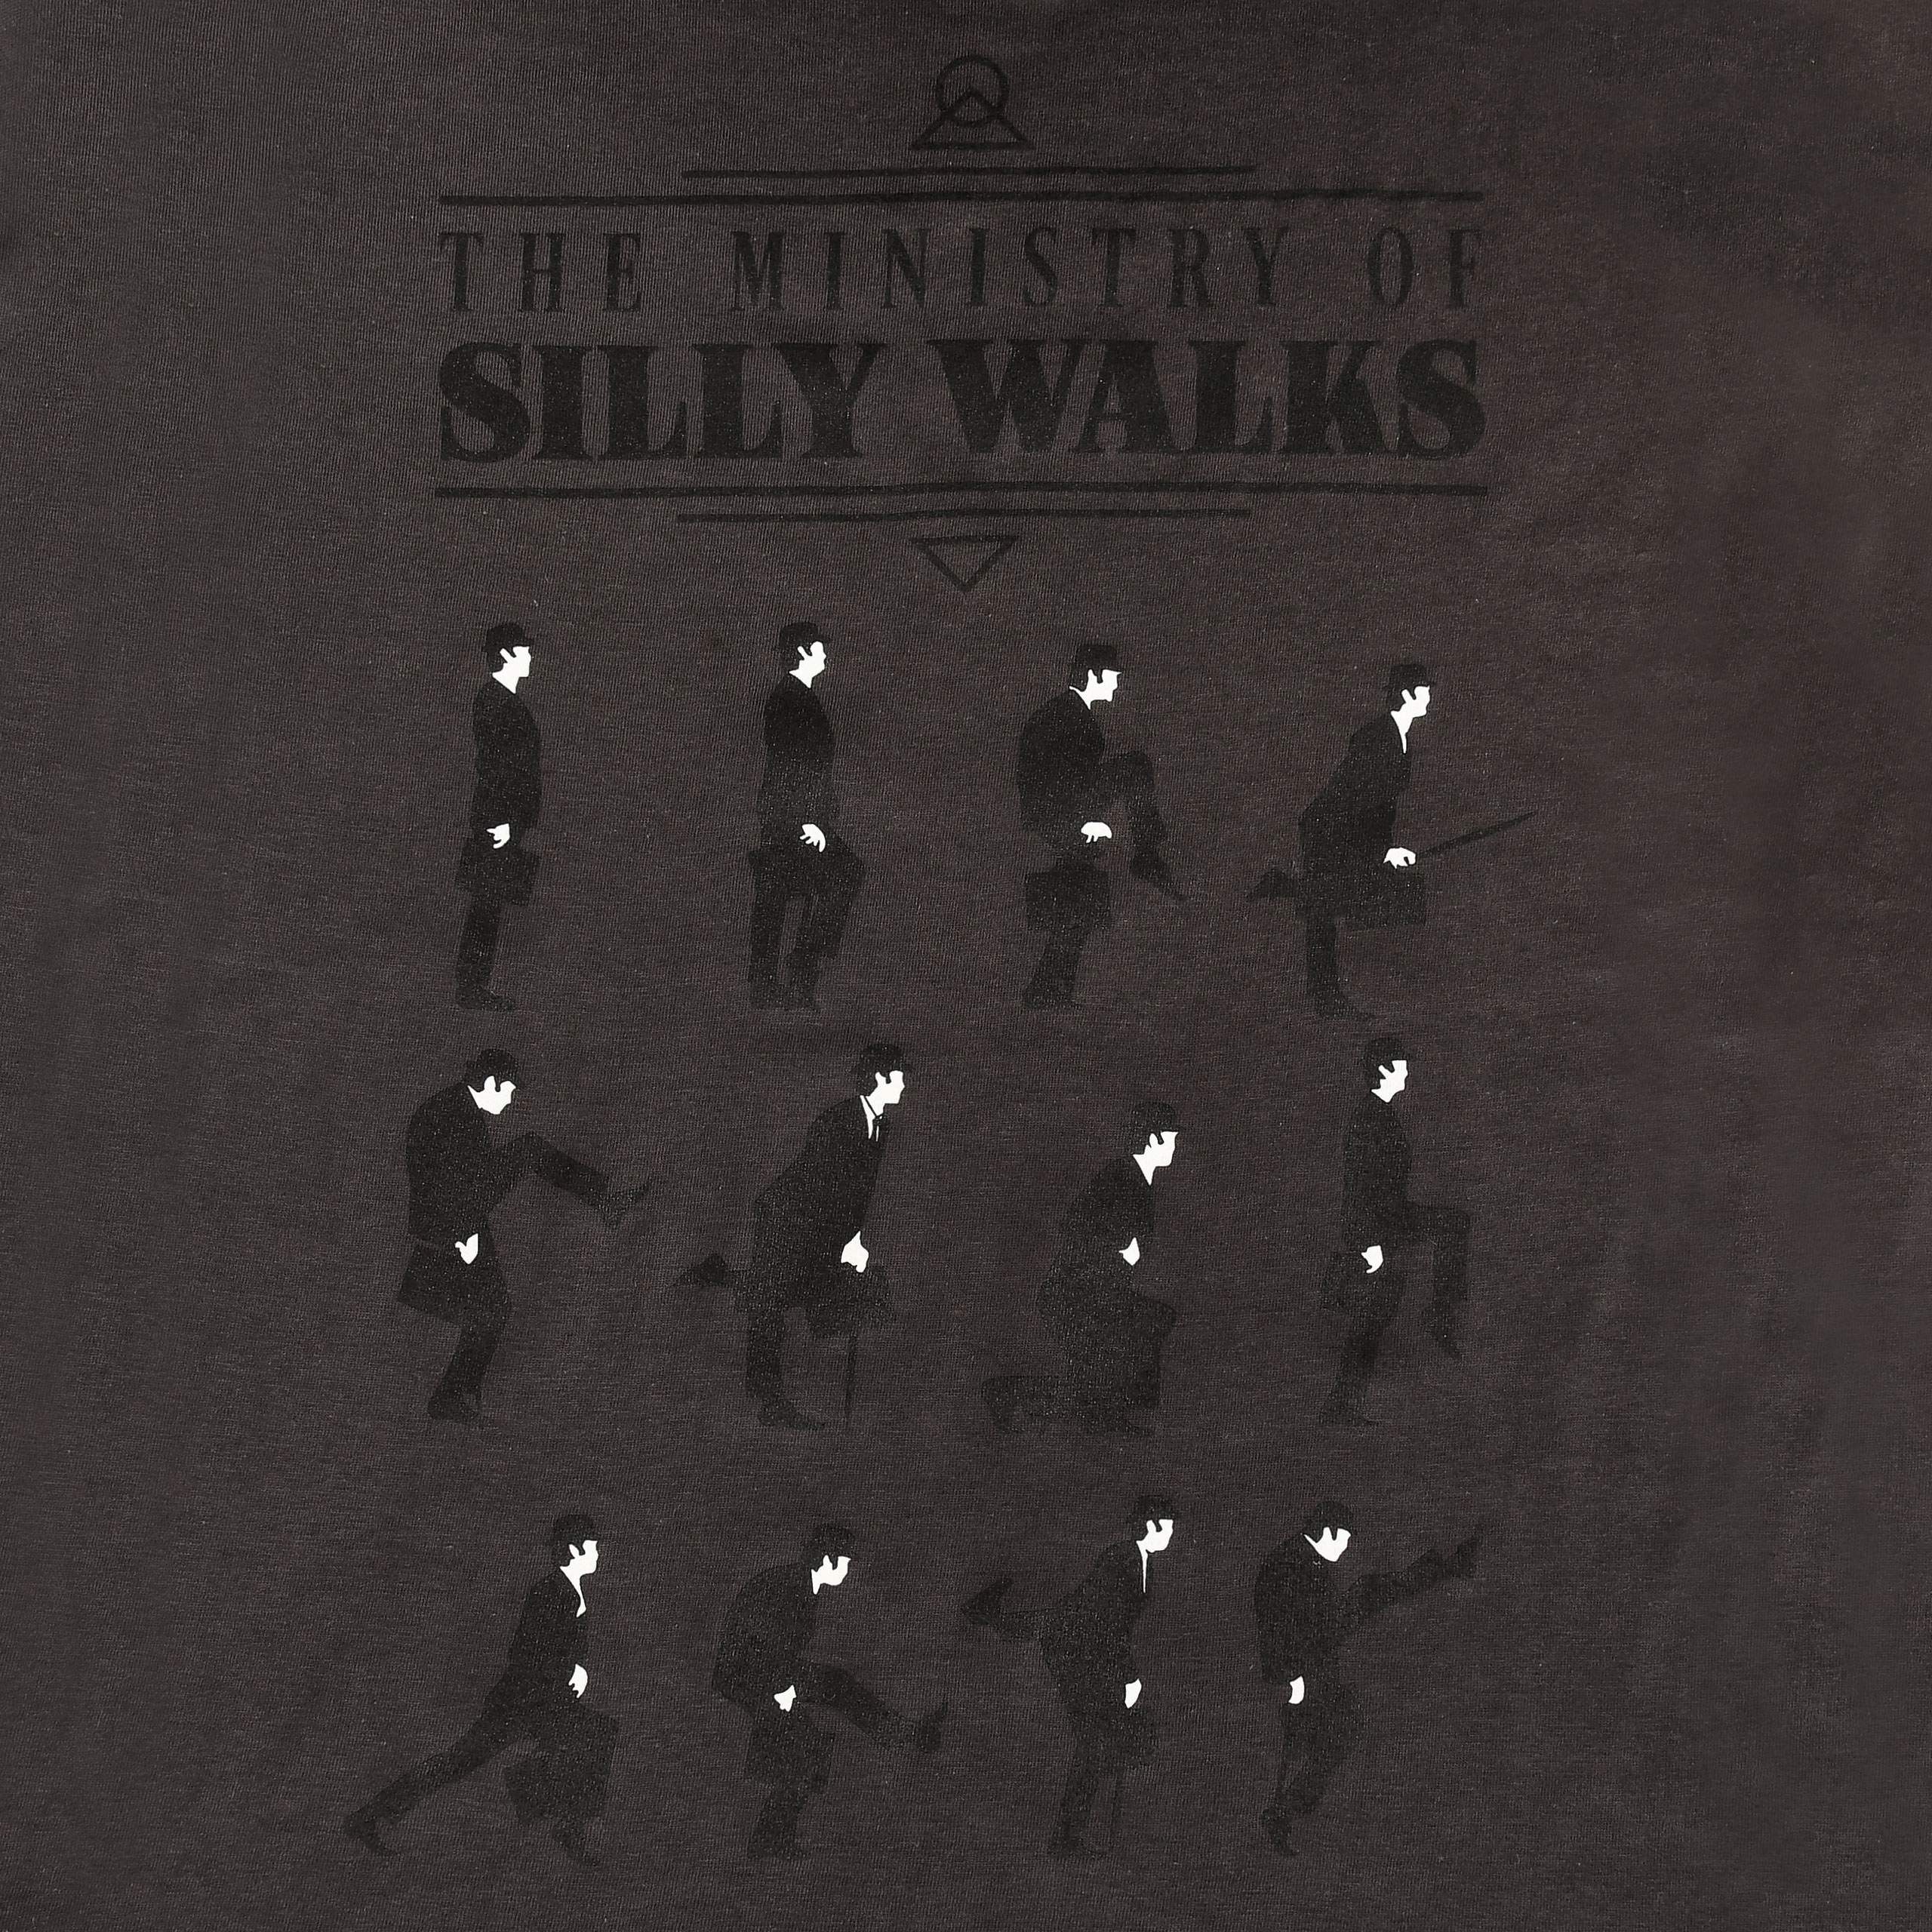 Ministry of Silly Walks T-Shirt for Monty Python Fans